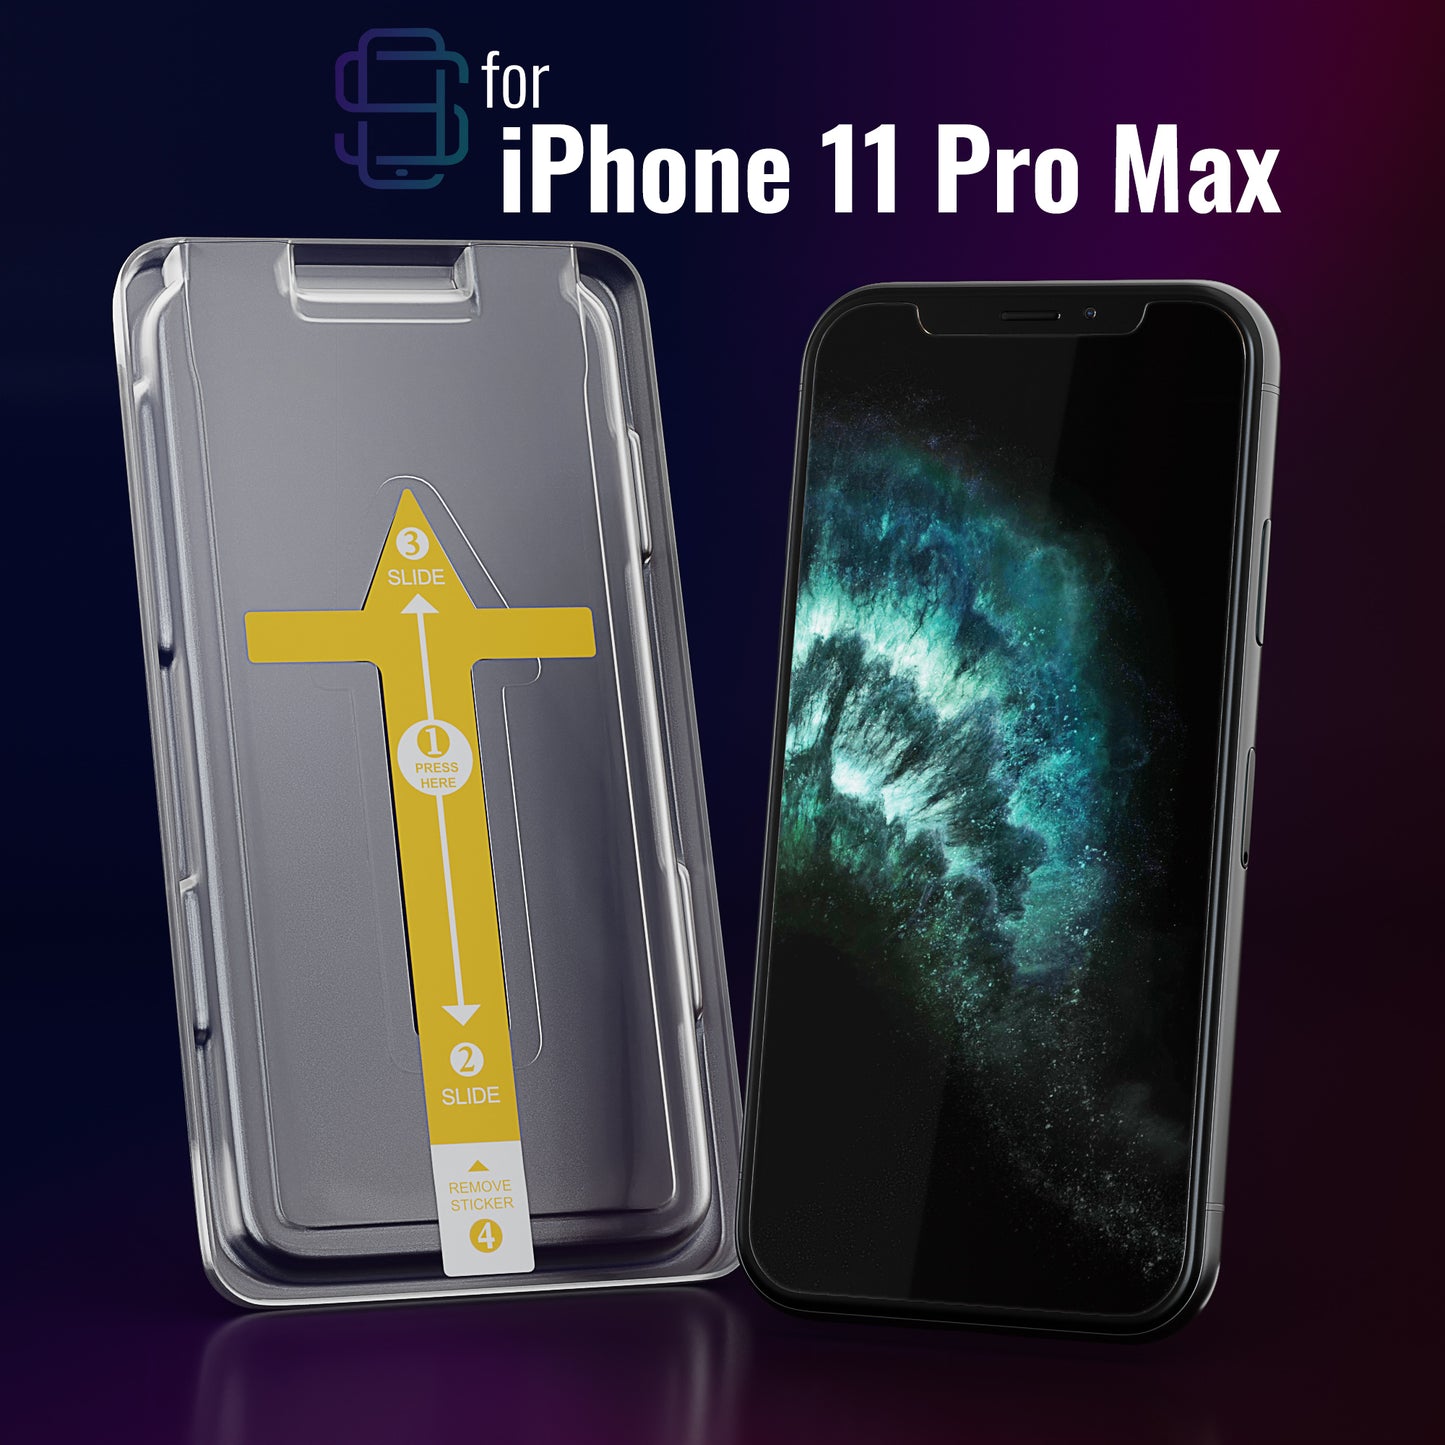 Defenslim iPhone 11 Pro Max Screen Protector [2-Pack] with Easy Auto-Align Install Kit